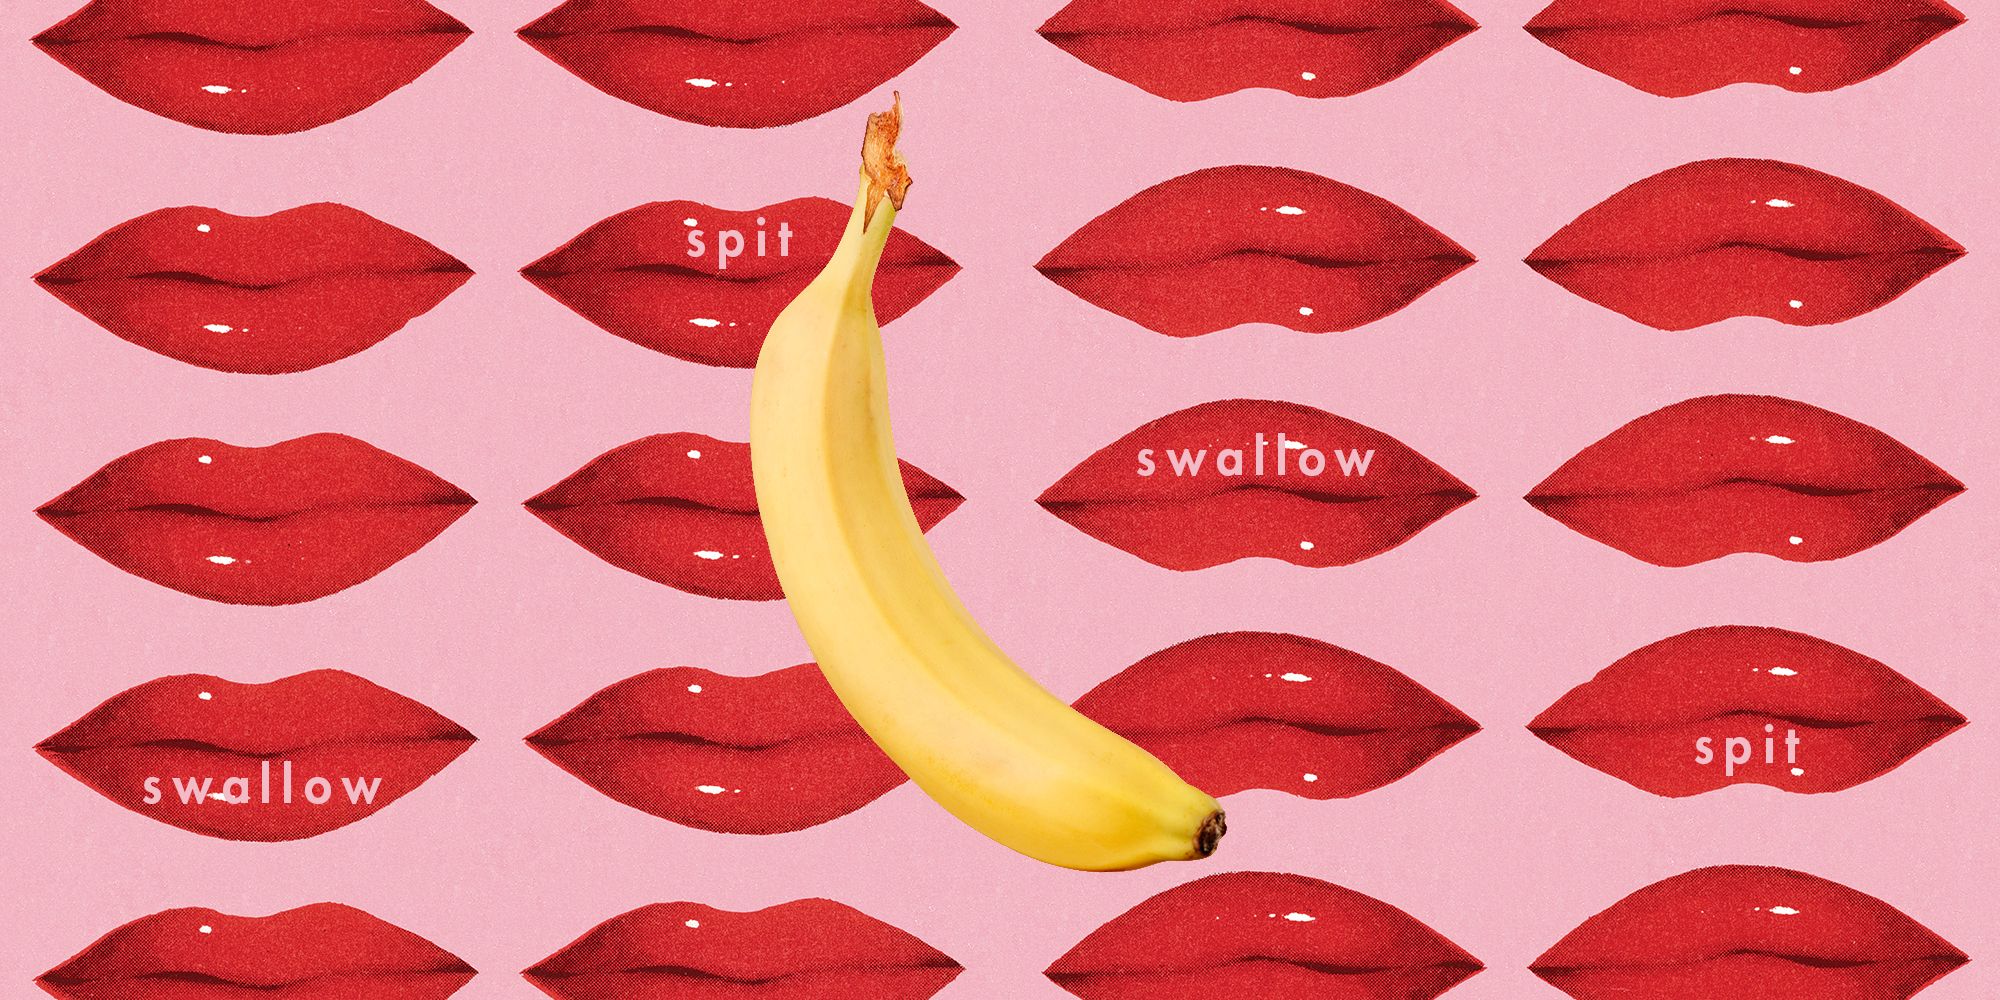 Spit or Swallow photo